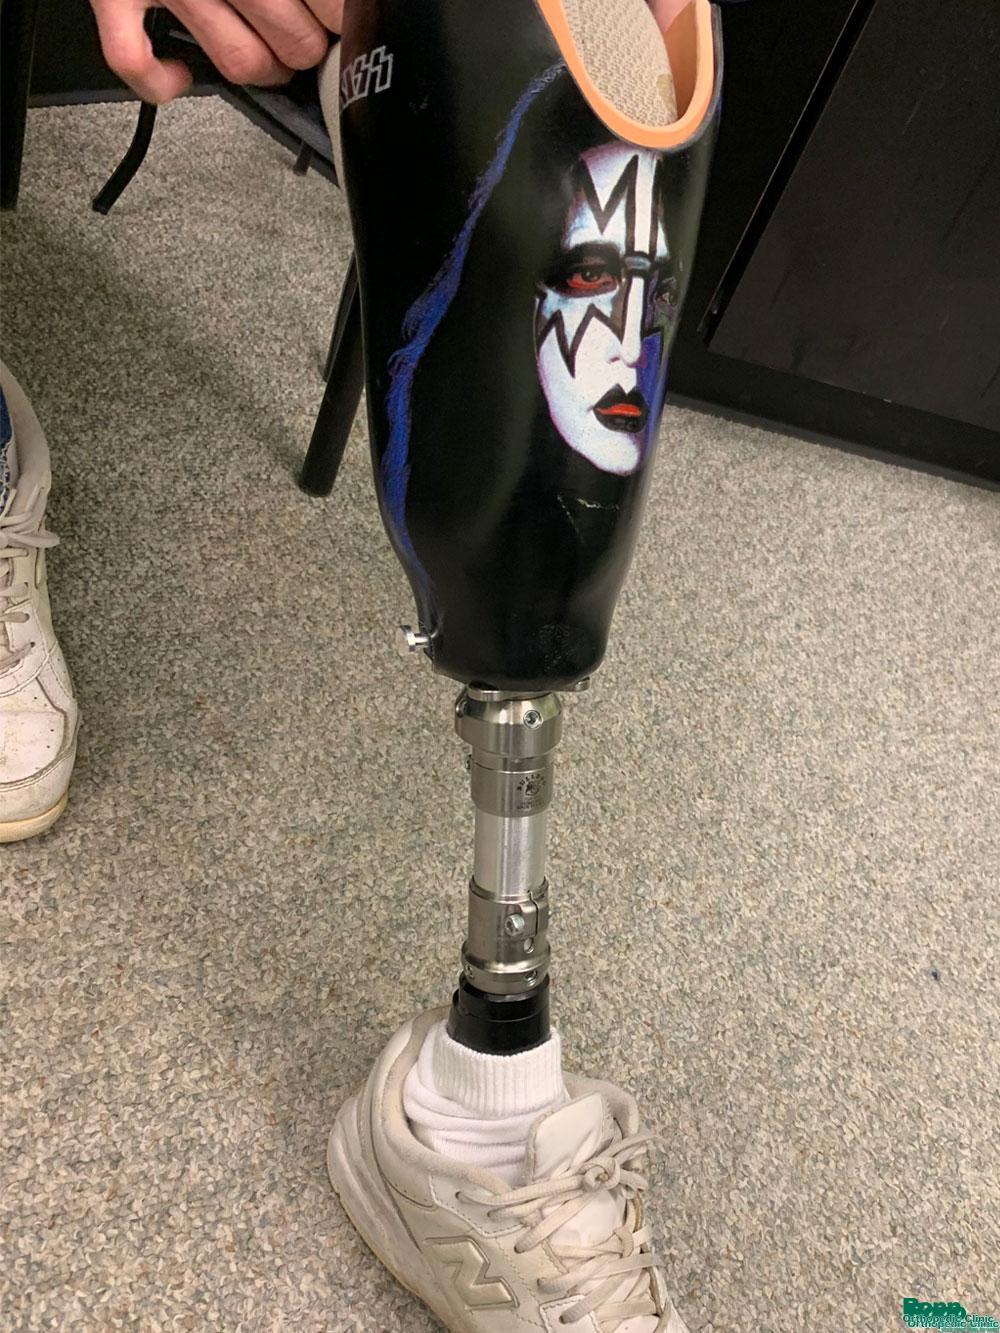 Ace Frehley gracing the prosthesis for our KISS fan.